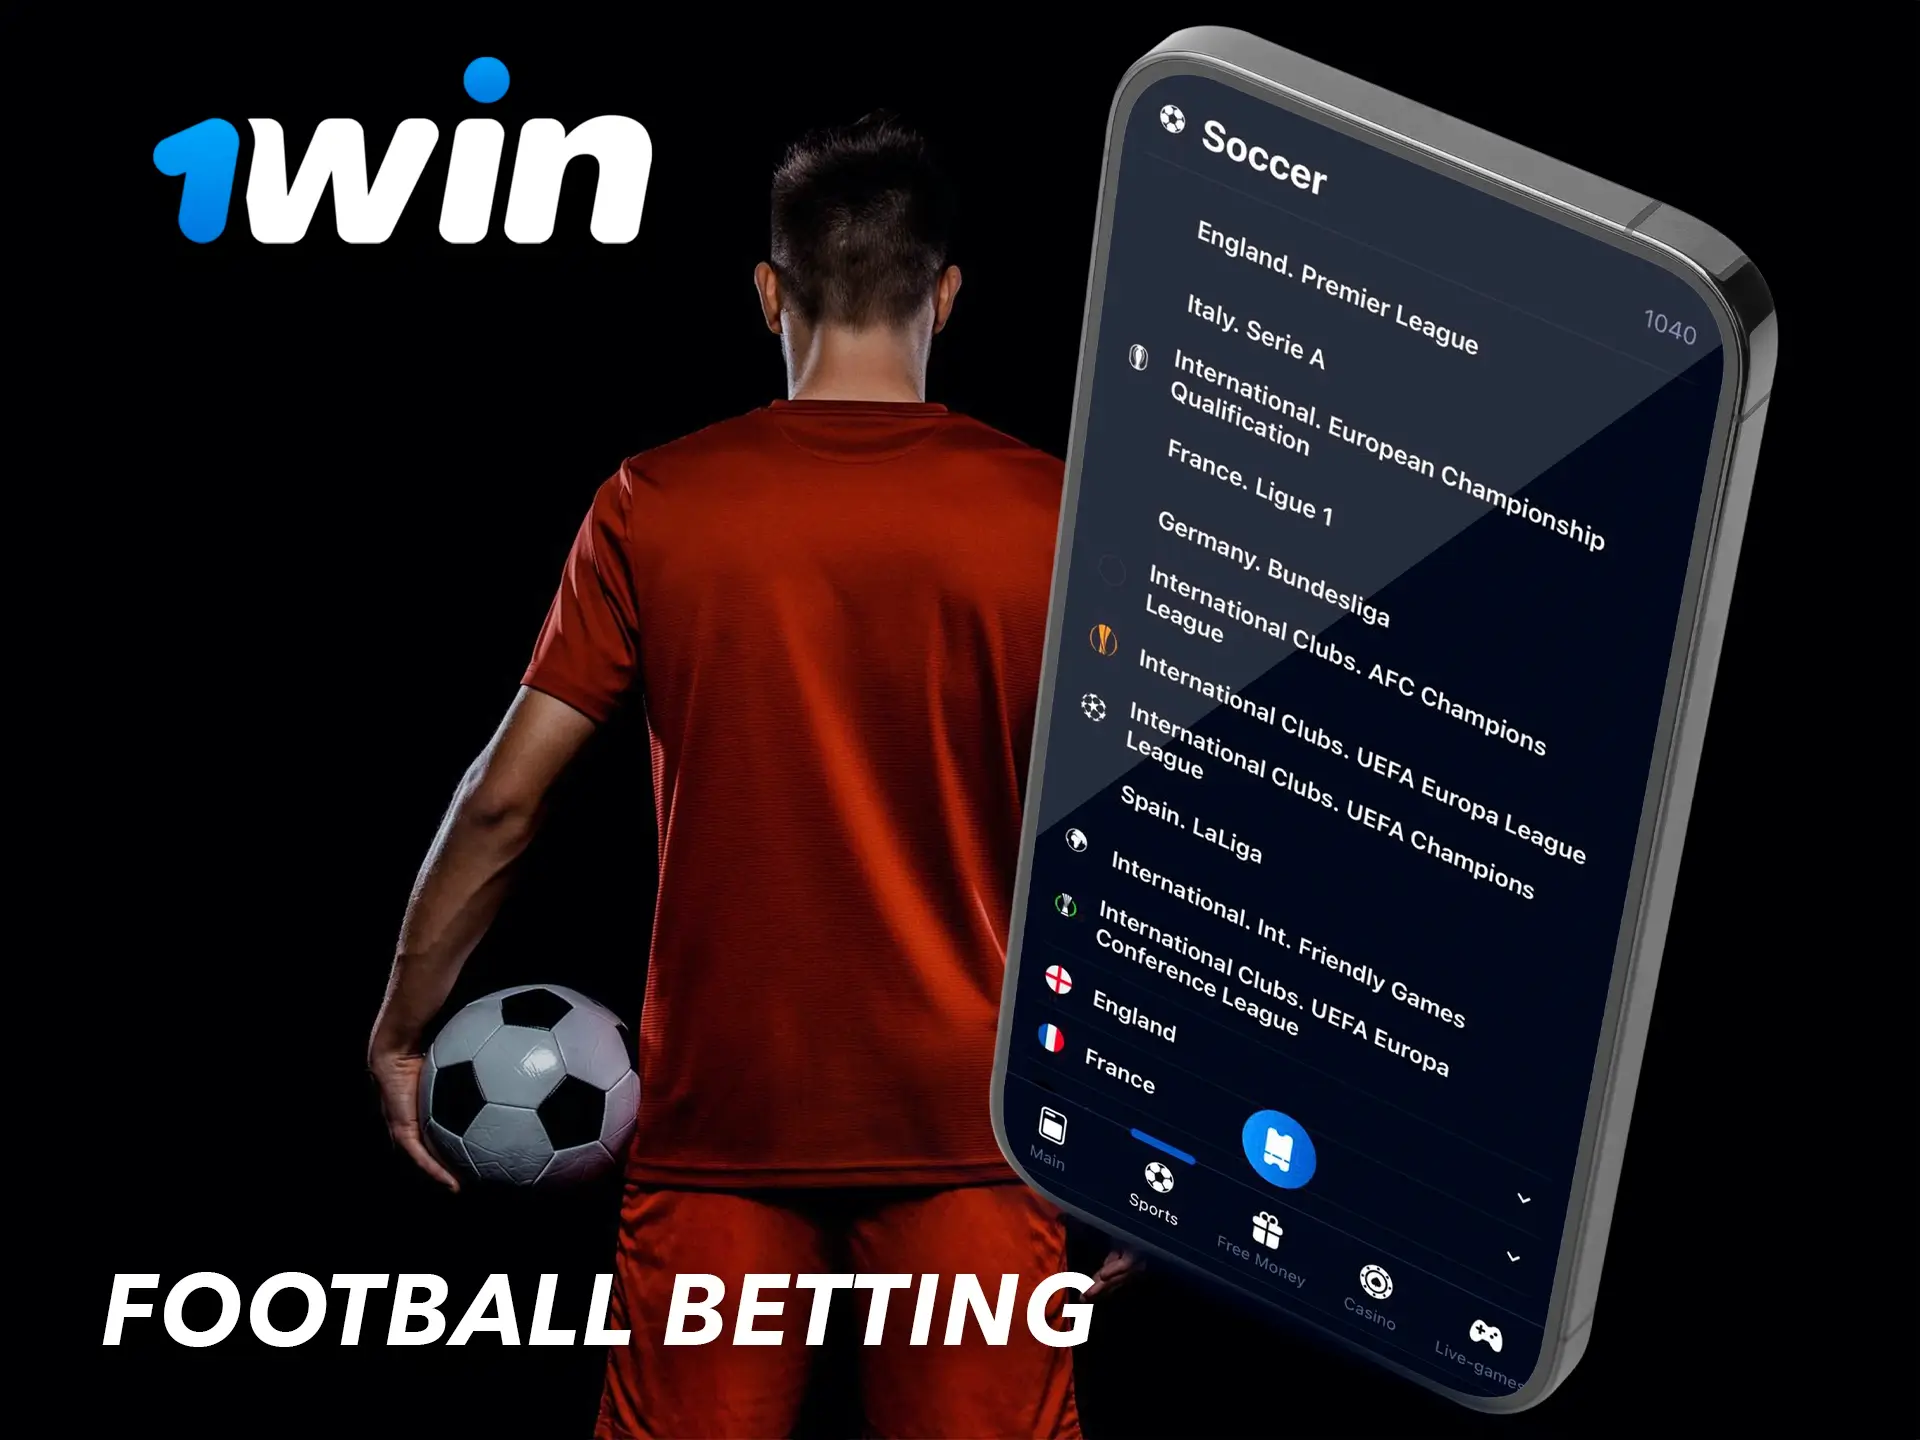 Bet predictions at 1Win on your favourite football teams.